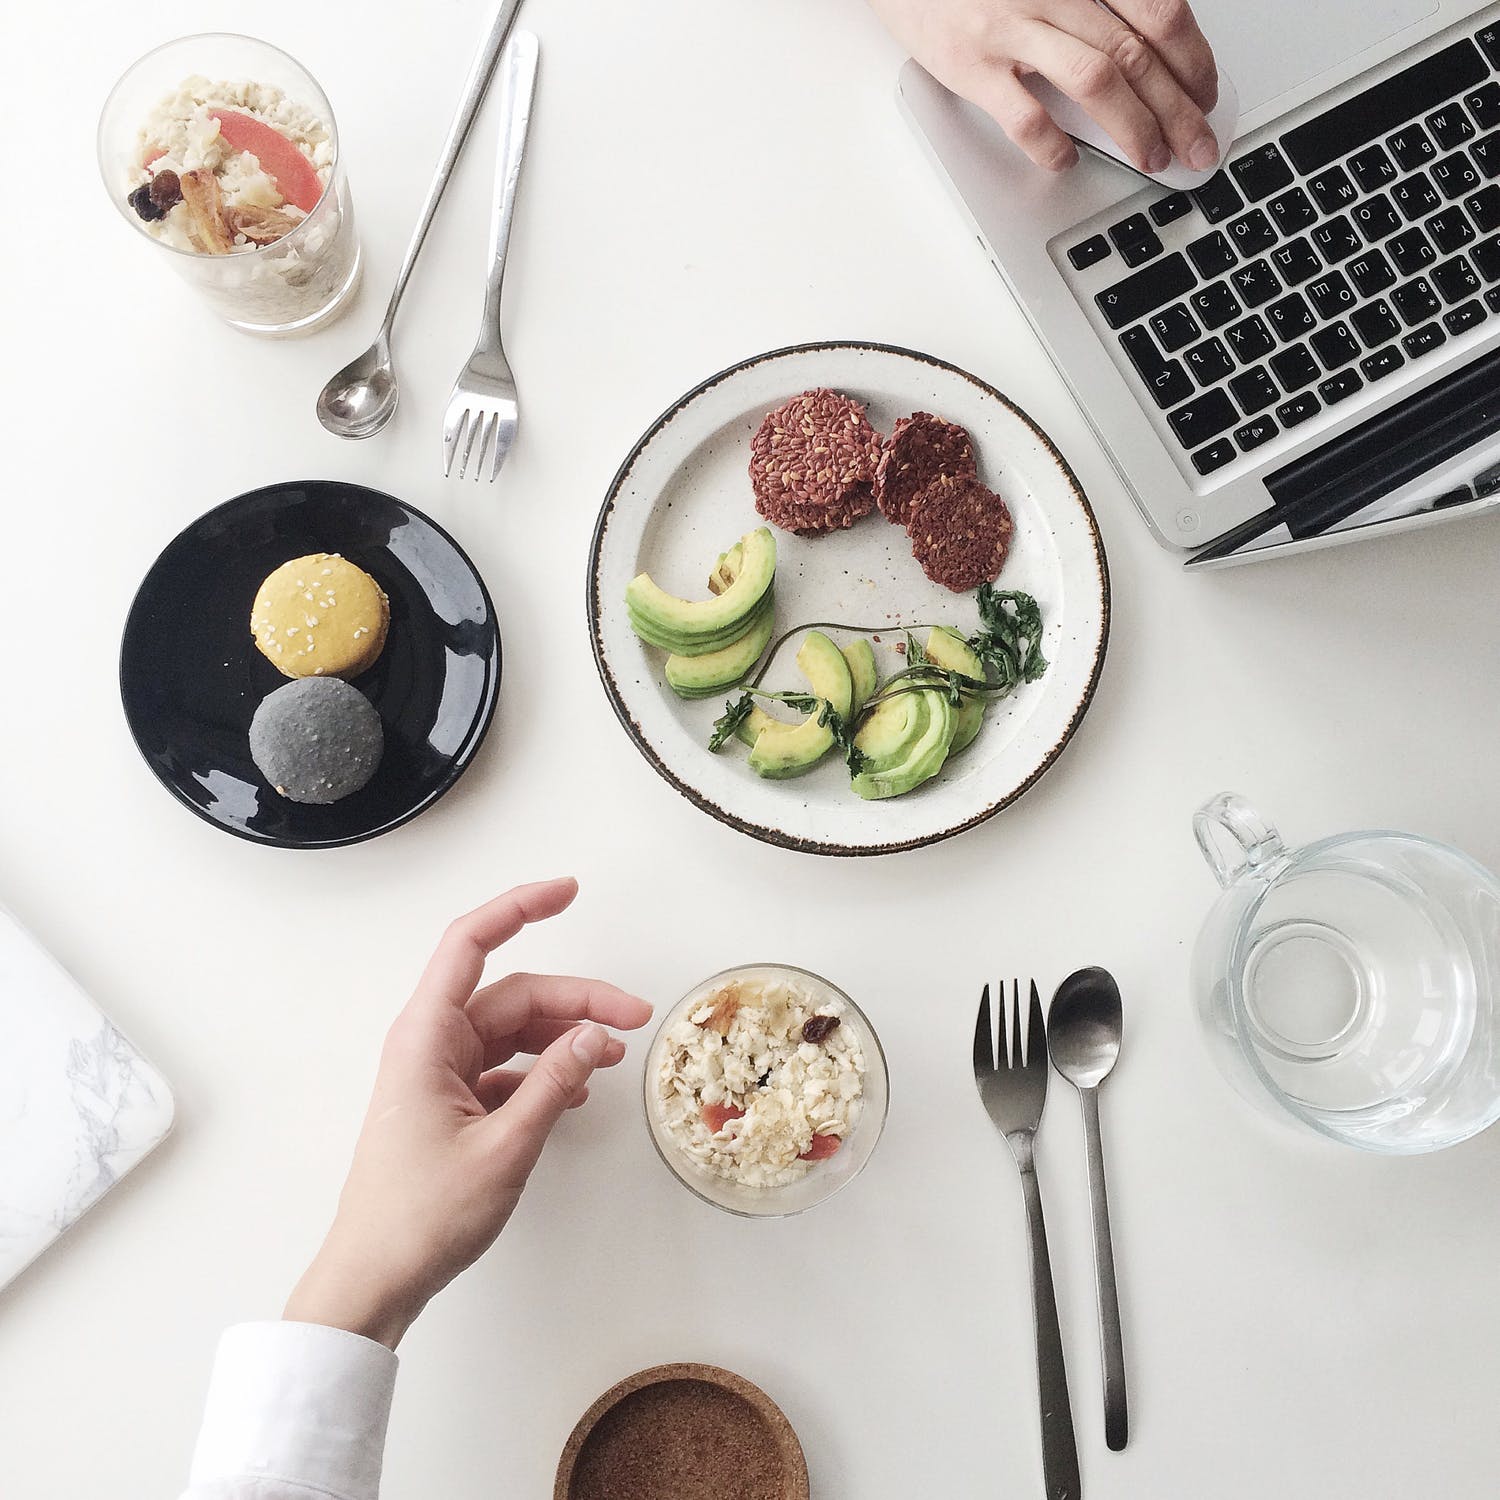 3 Reasons Why You Should Not Eat Lunch at Your Desk